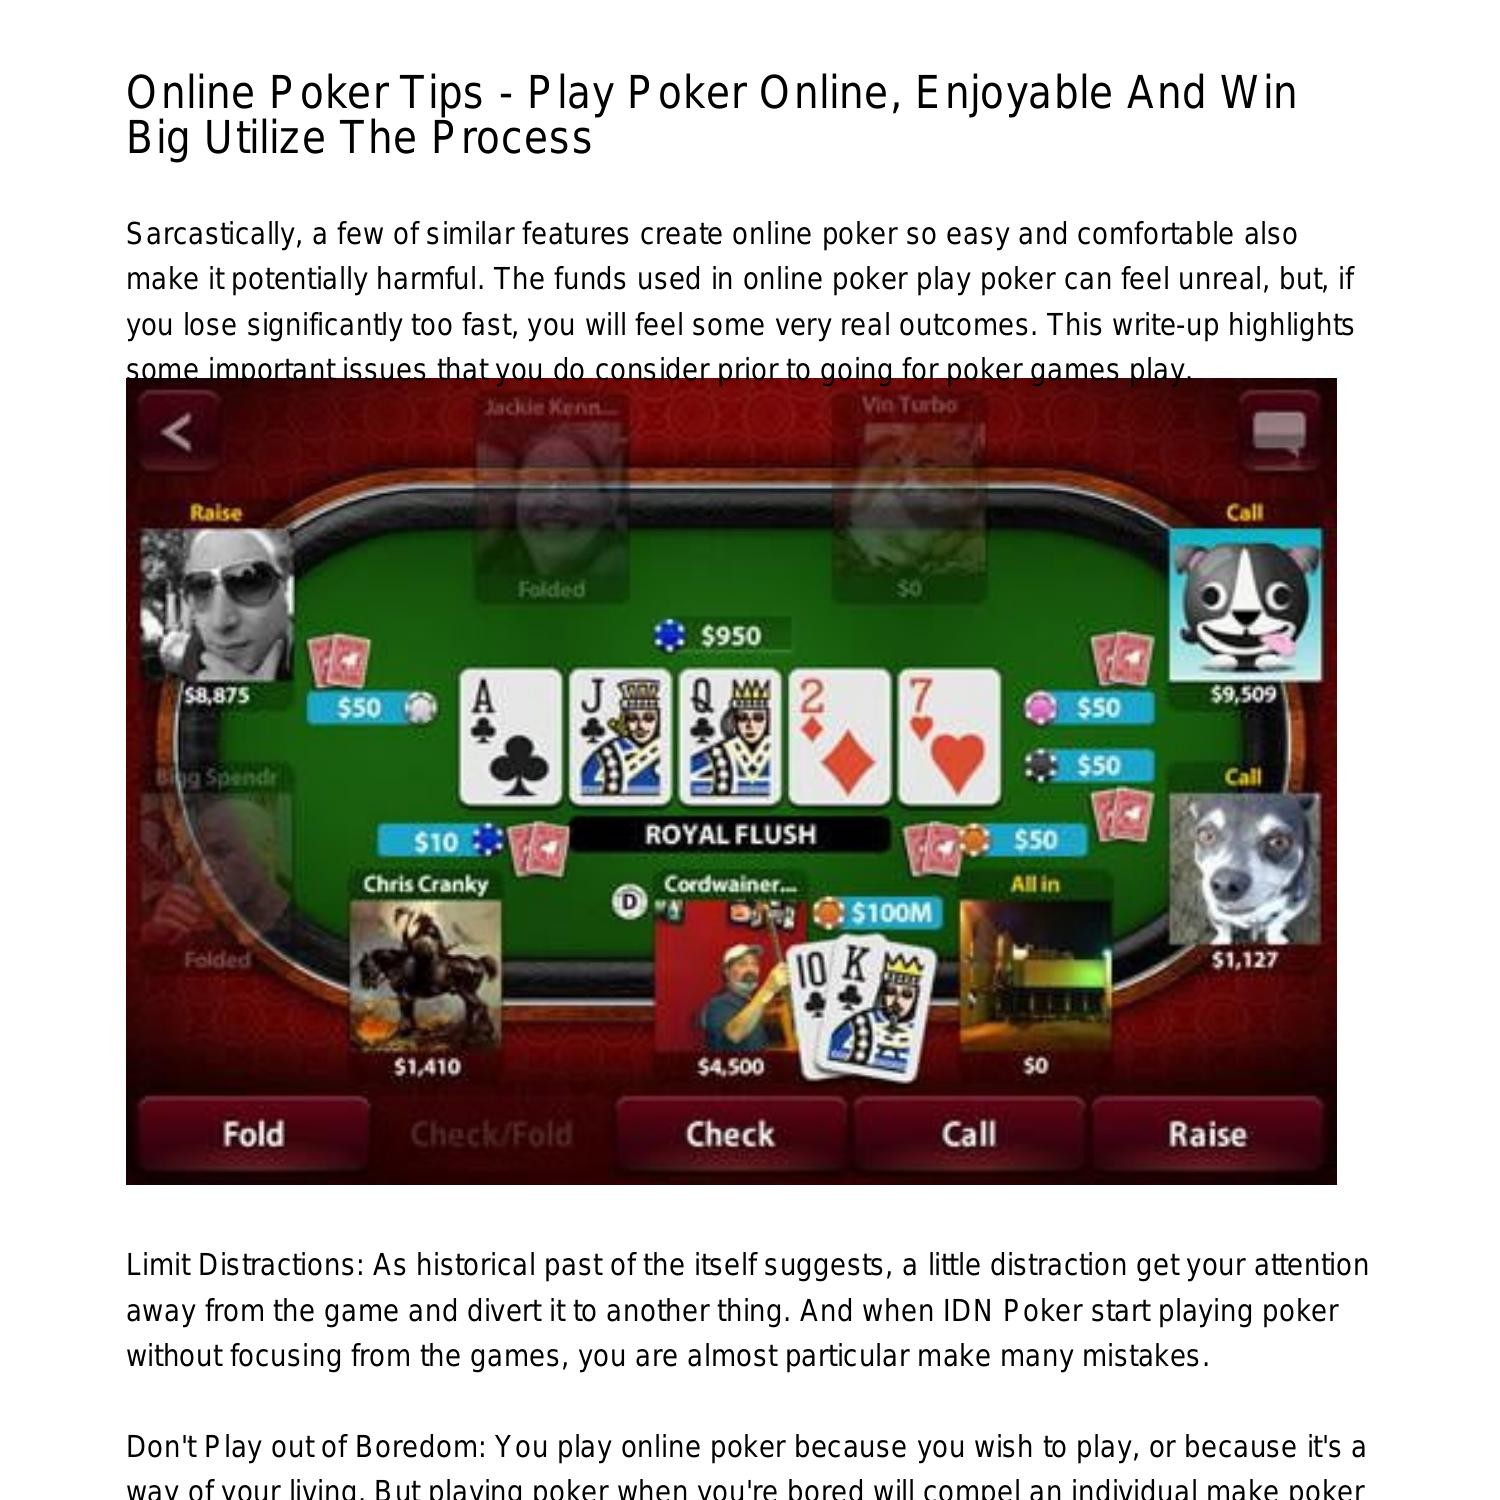 ice cream chicken Upbringing Online Poker Tips Play Poker Online Enjoyable And Win Big Cash In The  Processgptax.pdf.pdf | DocDroid